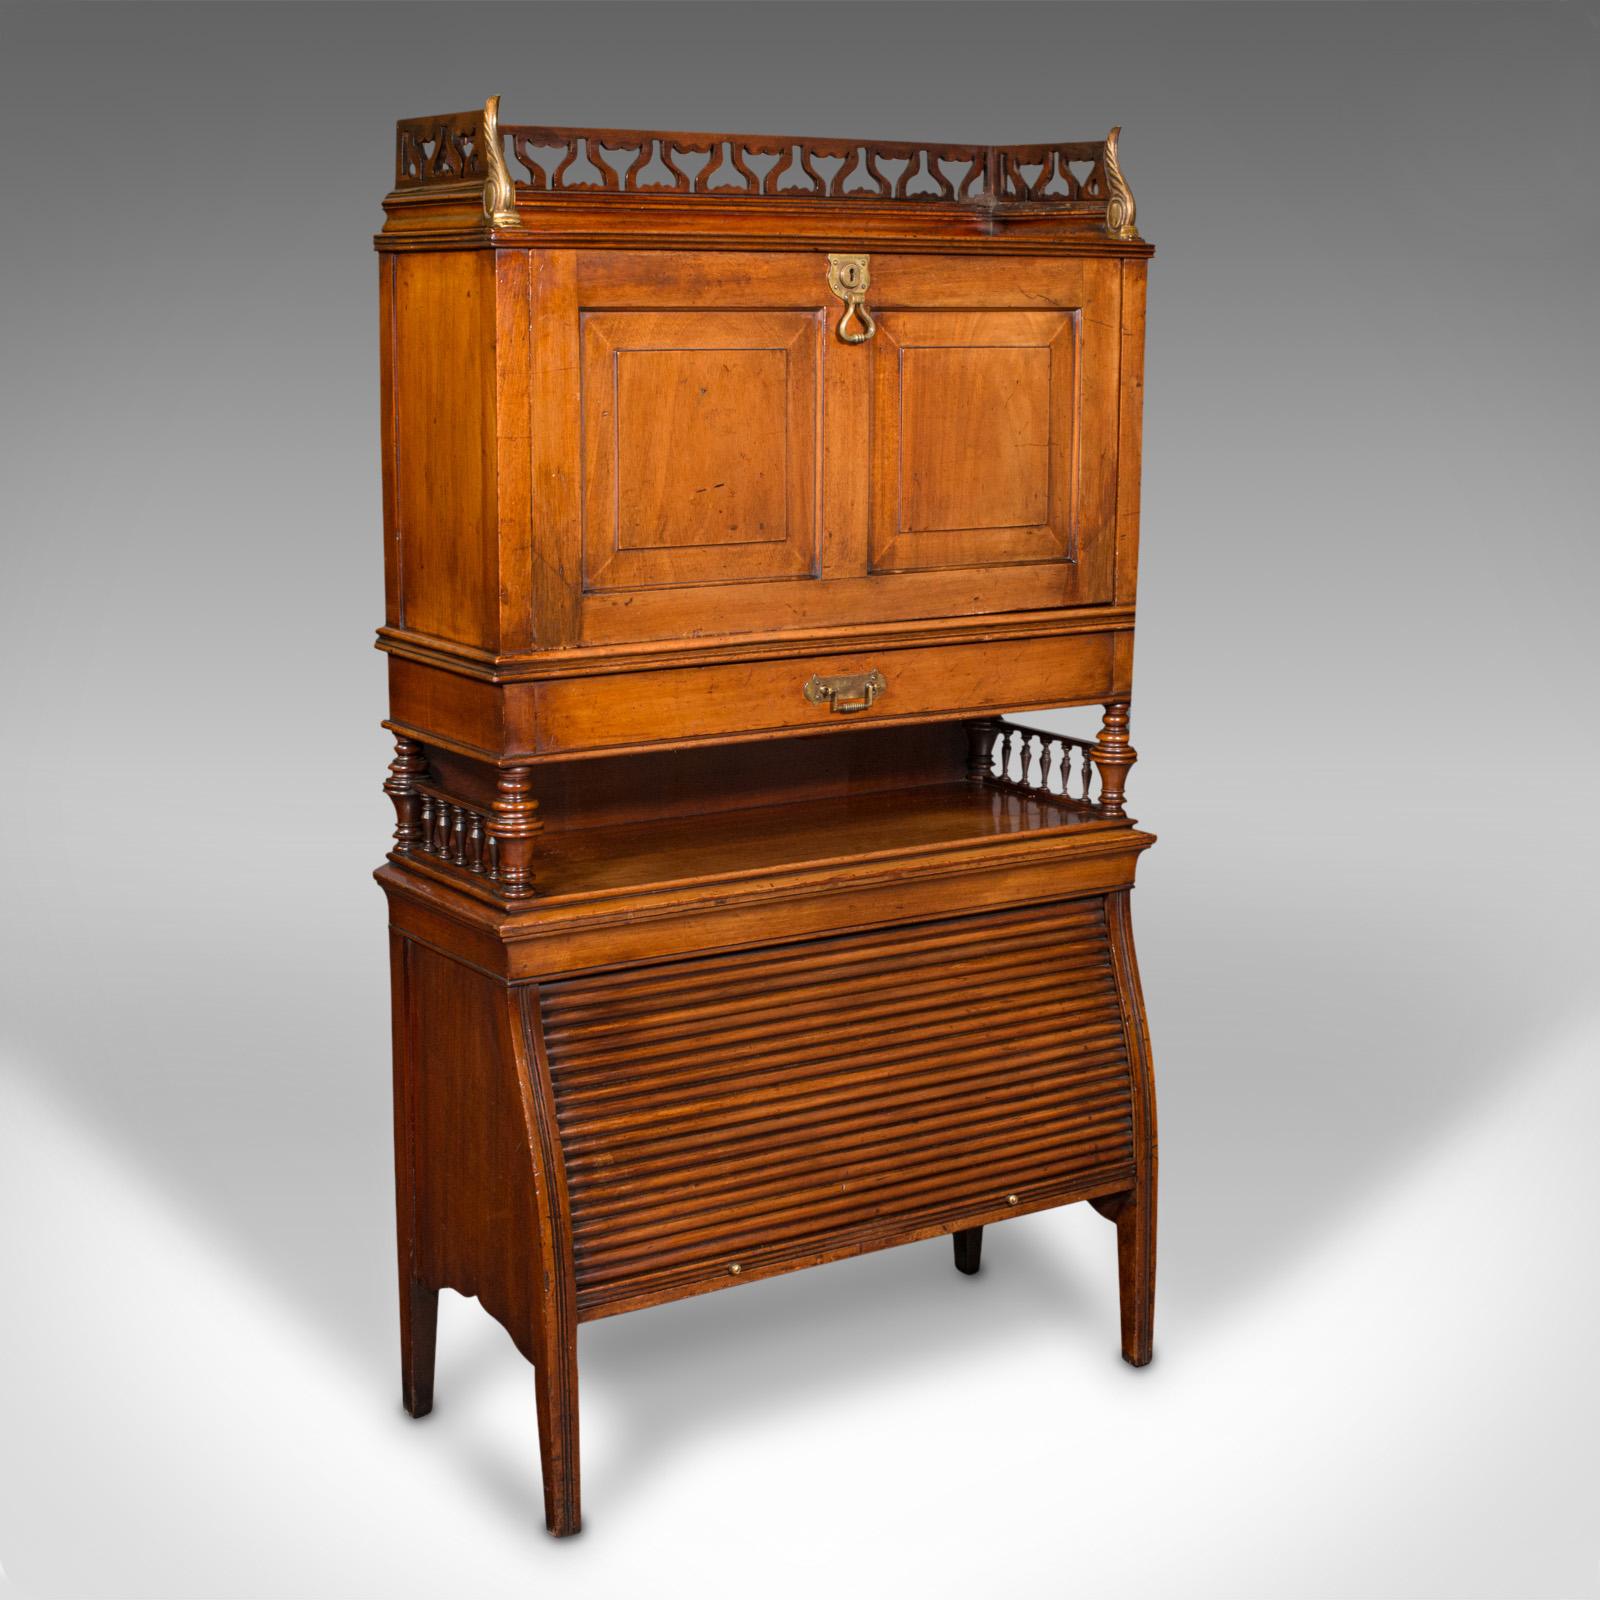 This is an antique bureau cabinet. An English, walnut drop-front writing desk with tambour, dating to the Edwardian period, circa 1910.

Graced with superb colour and of usefully compact stature
Displays a desirable aged patina and in good